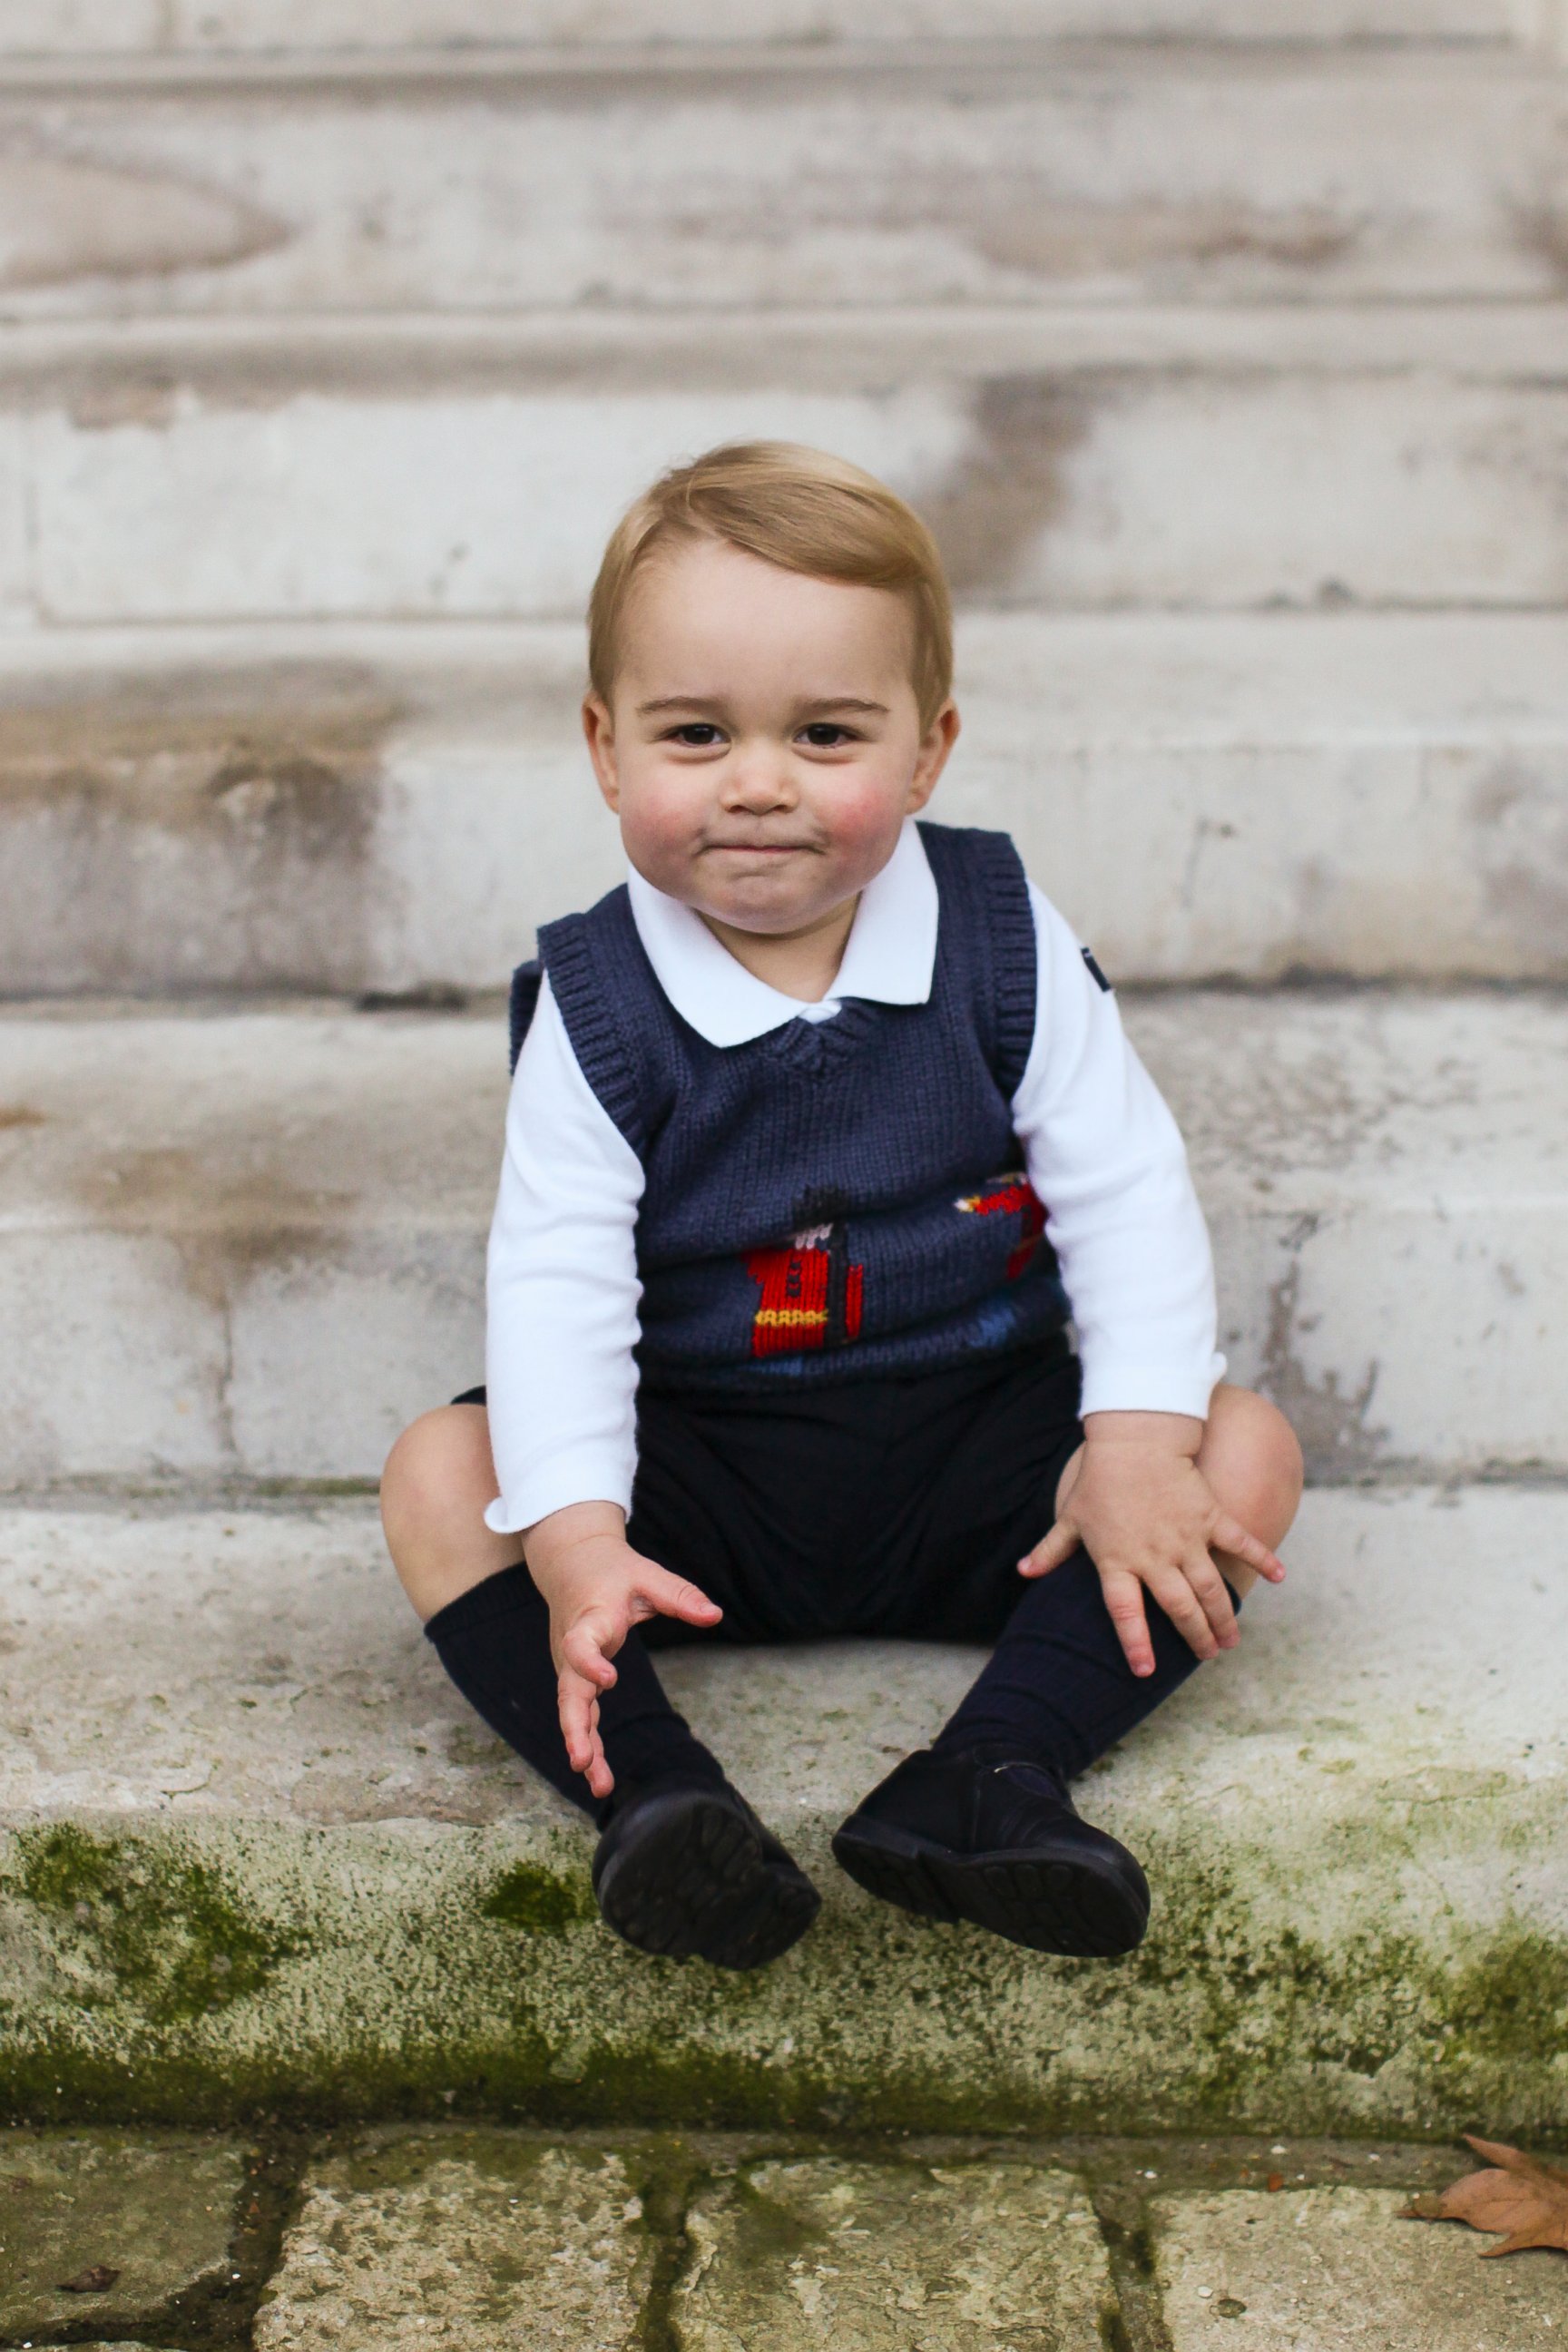 PHOTO: In this photo provided by The Duke and Duchess of Cambridge and taken in late Nov. 2014, Britain's Prince George poses for a photograph in a courtyard at Kensington Palace, London.